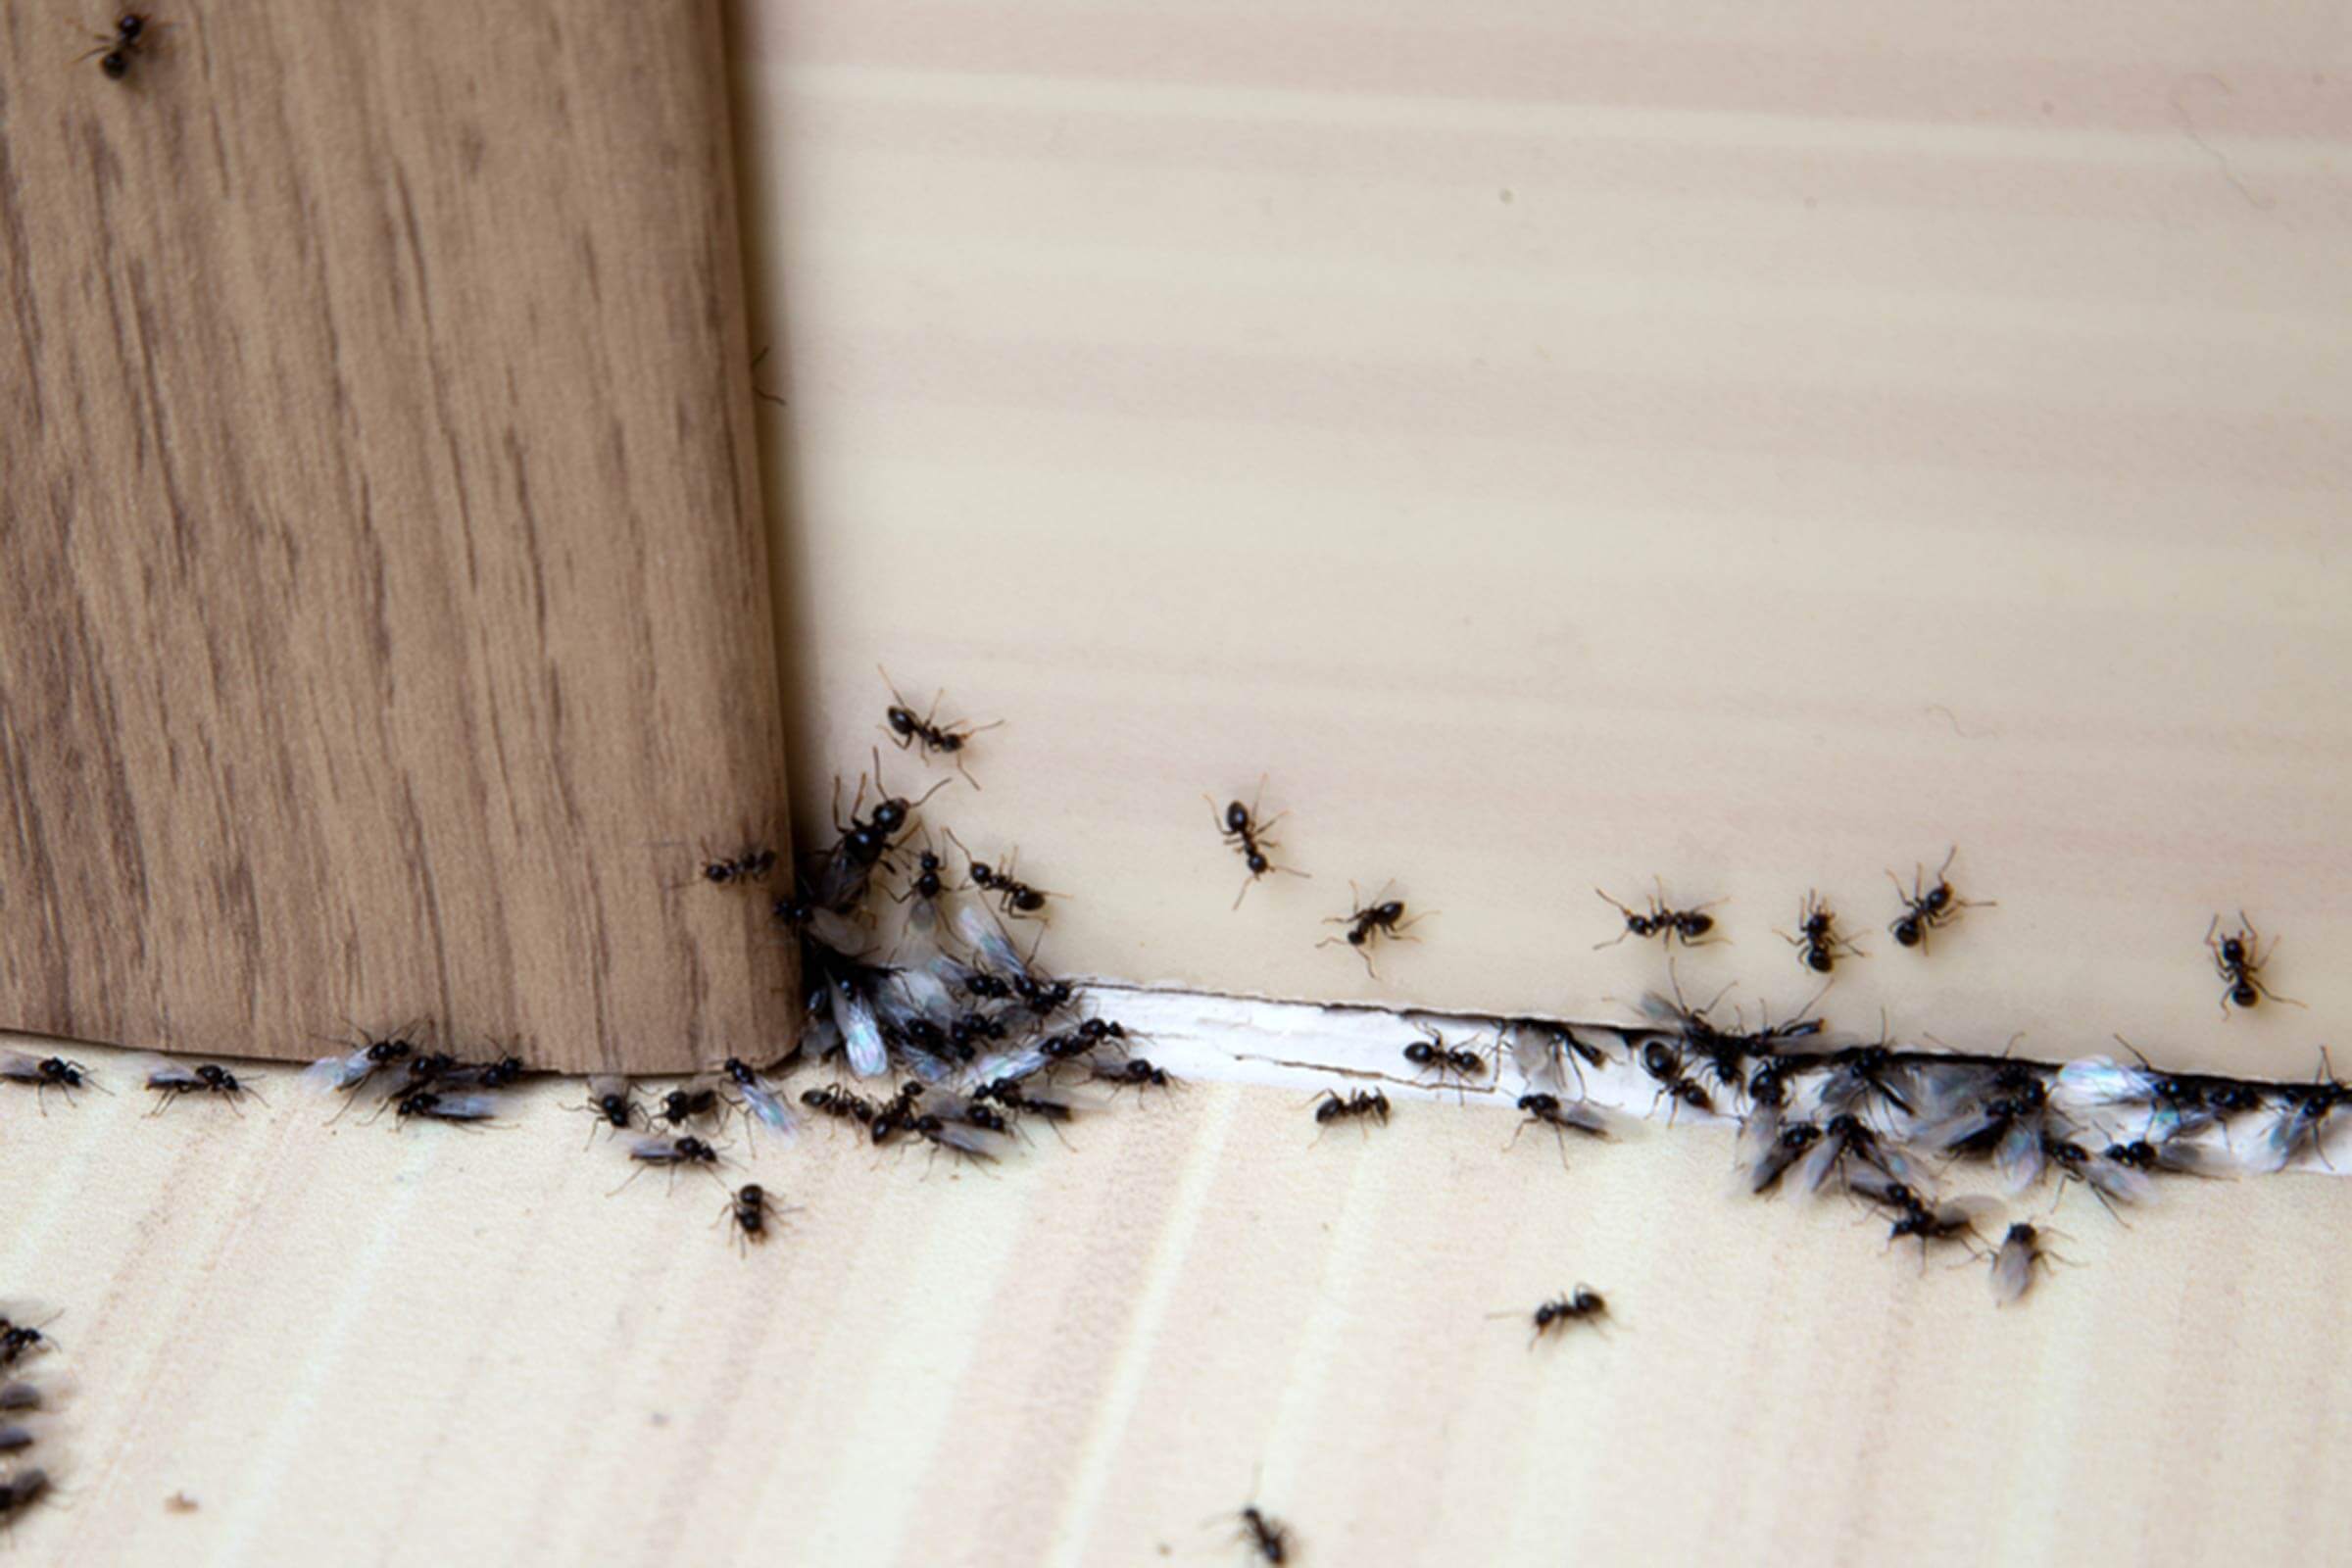 An ordinary air freshener will help you get rid of ants. For them it smells like poison.